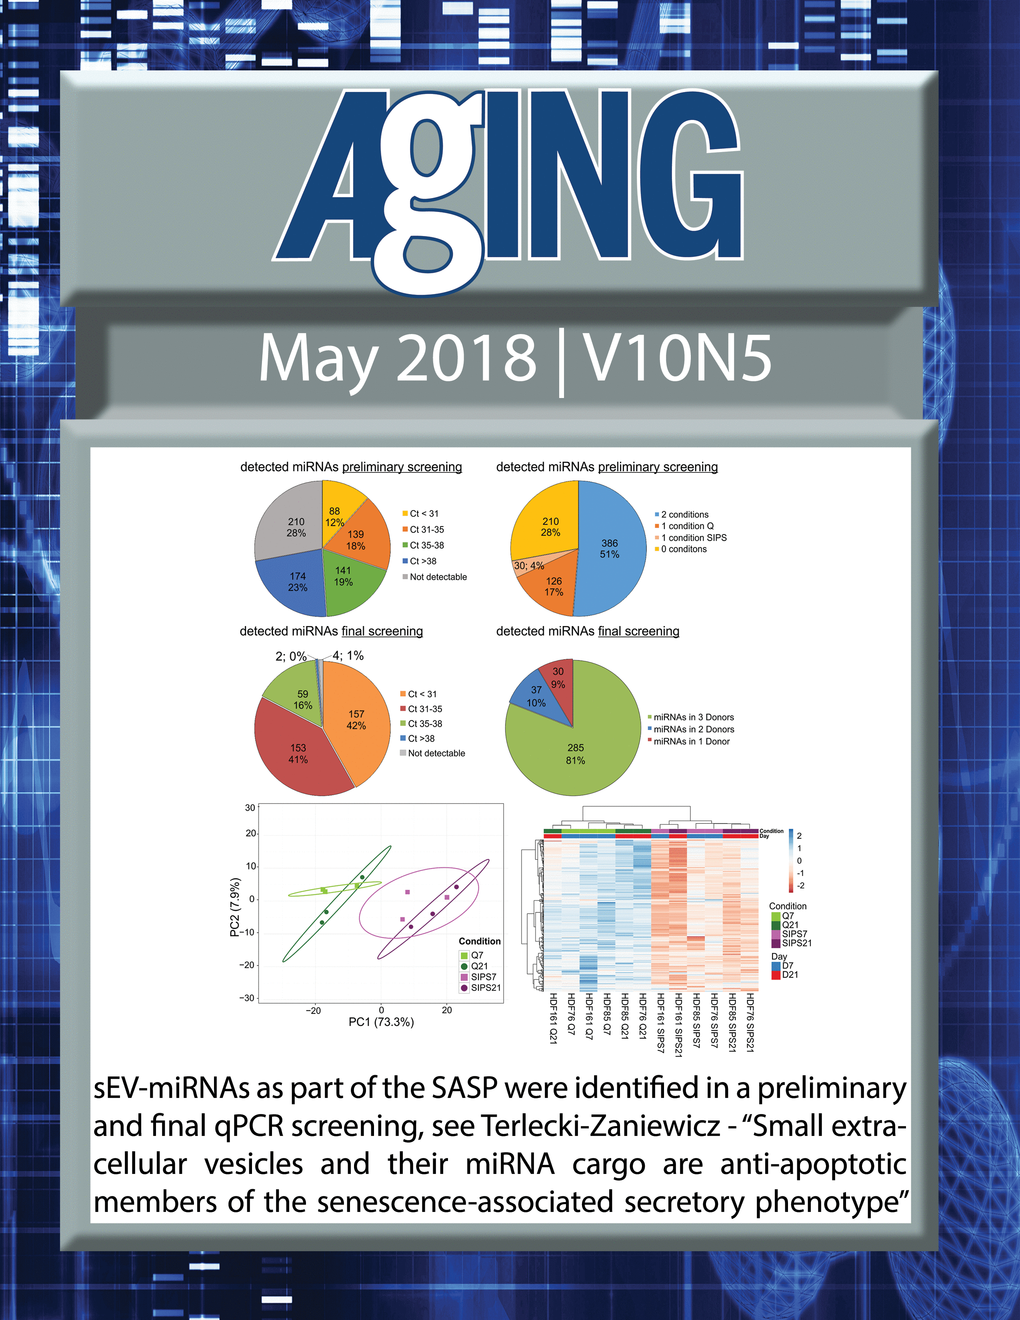 The cover for issue 5 of Aging features Figure 3 "sEV-miRNAs as part of the SASP were identified in a preliminary and final qPCR screening" from Terlecki-Zaniewicz et al.